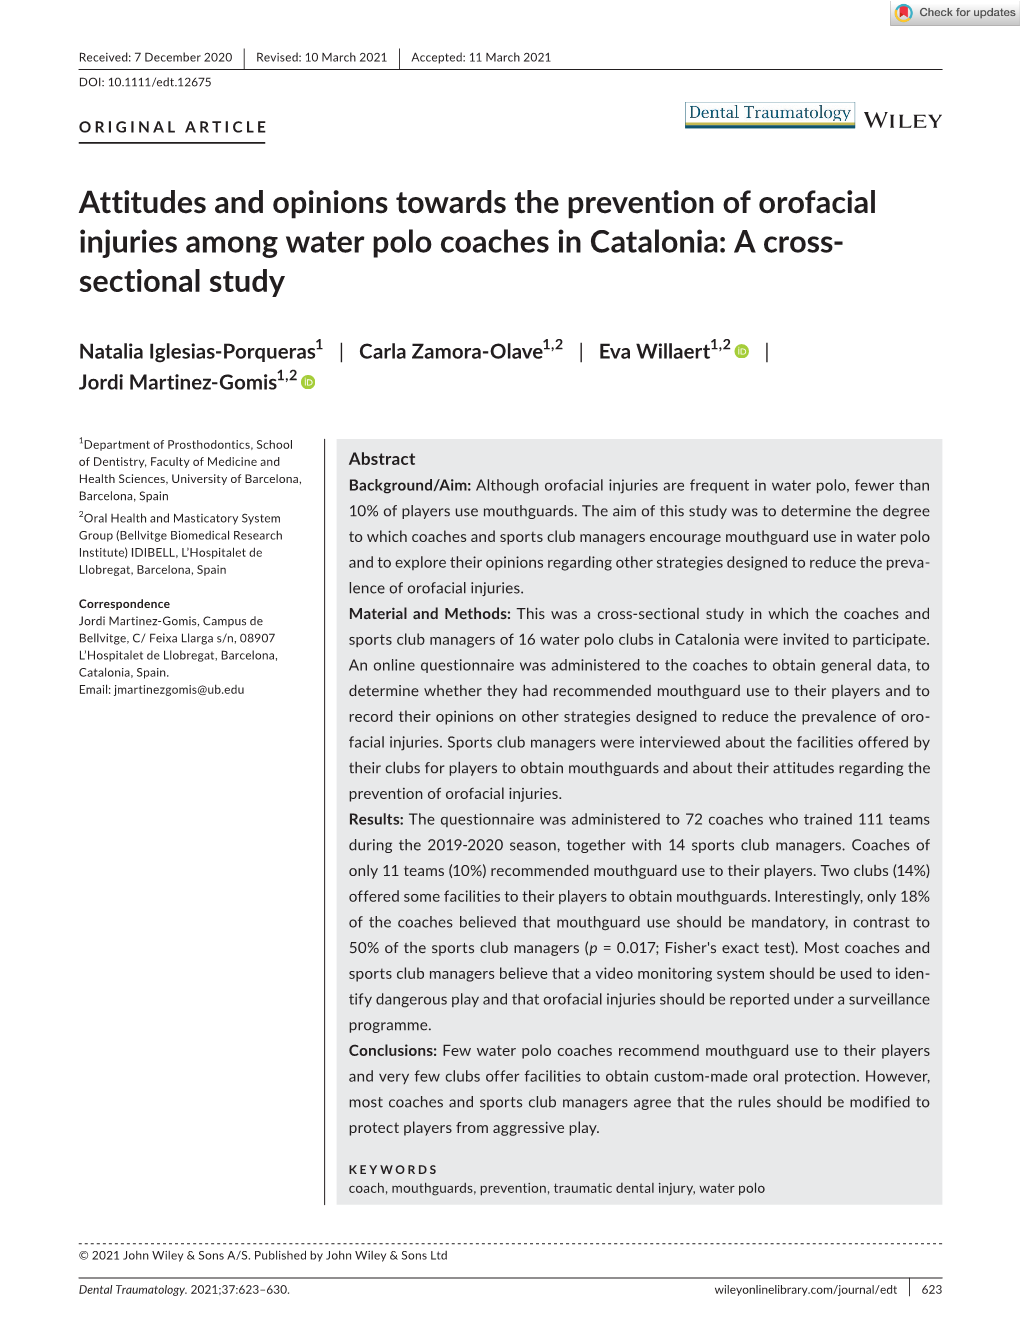 Attitudes and Opinions Towards the Prevention of Orofacial Injuries Among Water Polo Coaches in Catalonia: a Cross-­ Sectional Study